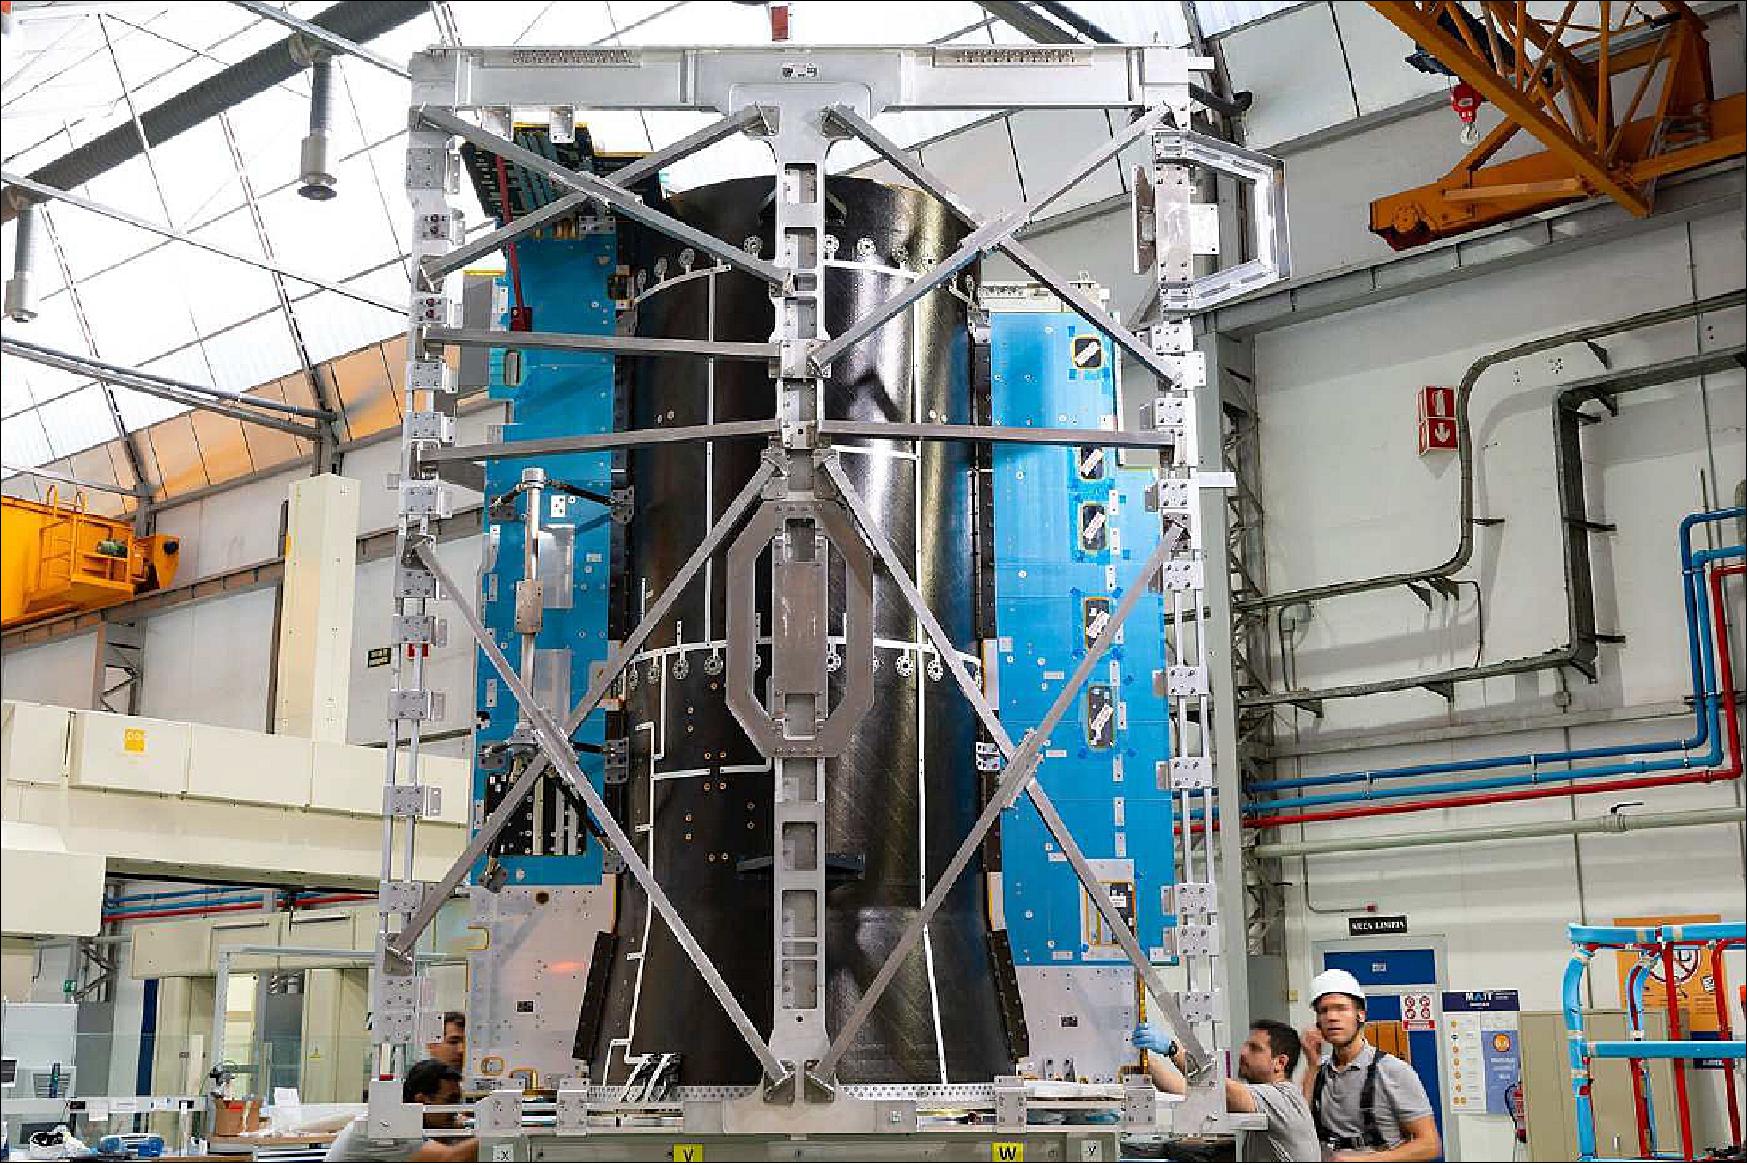 Figure 3: In July 2019, Airbus has completed the first step in the construction of the inner structure of ESA's JUICE satellite. The inner structure or SSTS (Structure, Shielding and Thermal control Subsystem), built at the Madrid-Barajas site of Airbus, is carbon fibre and is composed of the central load carrying cylinder, shear panels, two equipment protecting Vaults, the TCS (Thermal Control System) which includes a heat pipes network and multilayer insulation, and secondary elements such as 13 additive manufacturing brackets. This key element weighs 580 kg and will support the satellite's weight of 5,300 kg (of which about 3,000kg is chemical propellant). Jupiter's distance from the Sun will make it challenging to generate energy. For this reason the spacecraft is equipped with solar arrays with a total surface of 85 m2, the largest ever built for any interplanetary spacecraft (image credit: Airbus DS) 10)